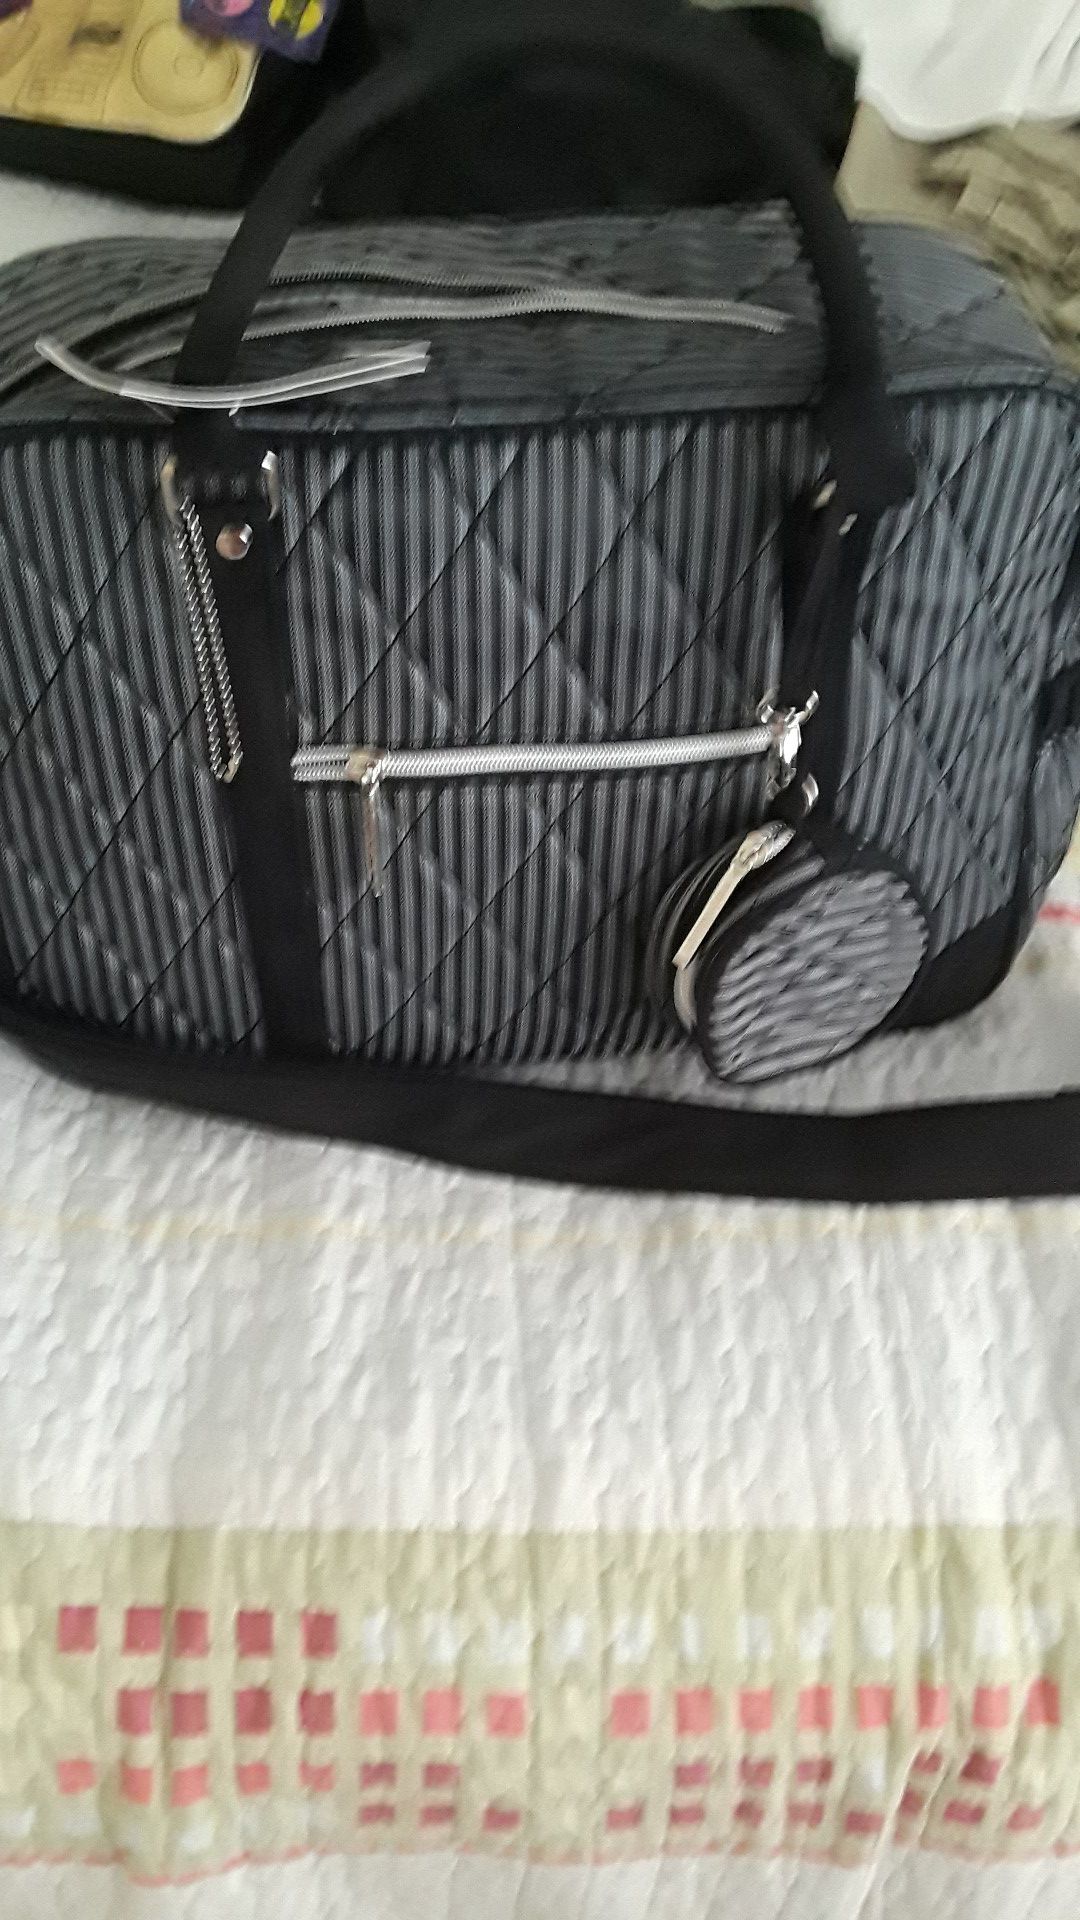 Baby diaper bag with changing pad from Amazon